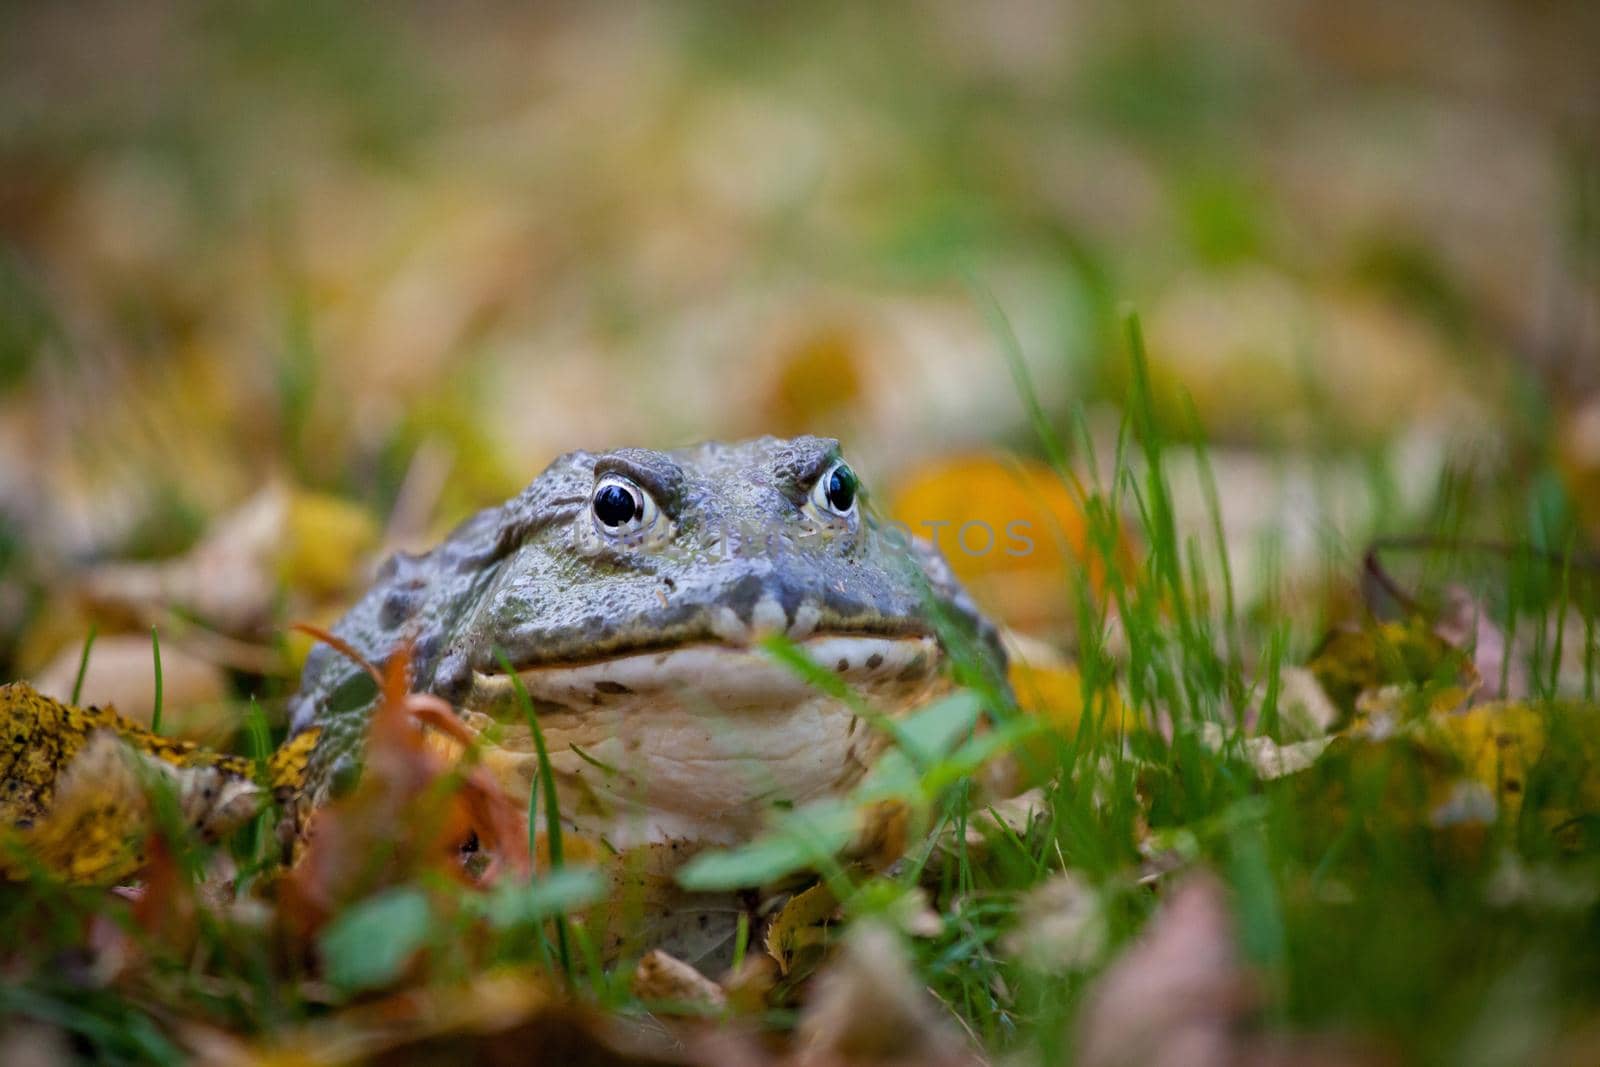 The African bullfrog, adult male in autumn park by RosaJay